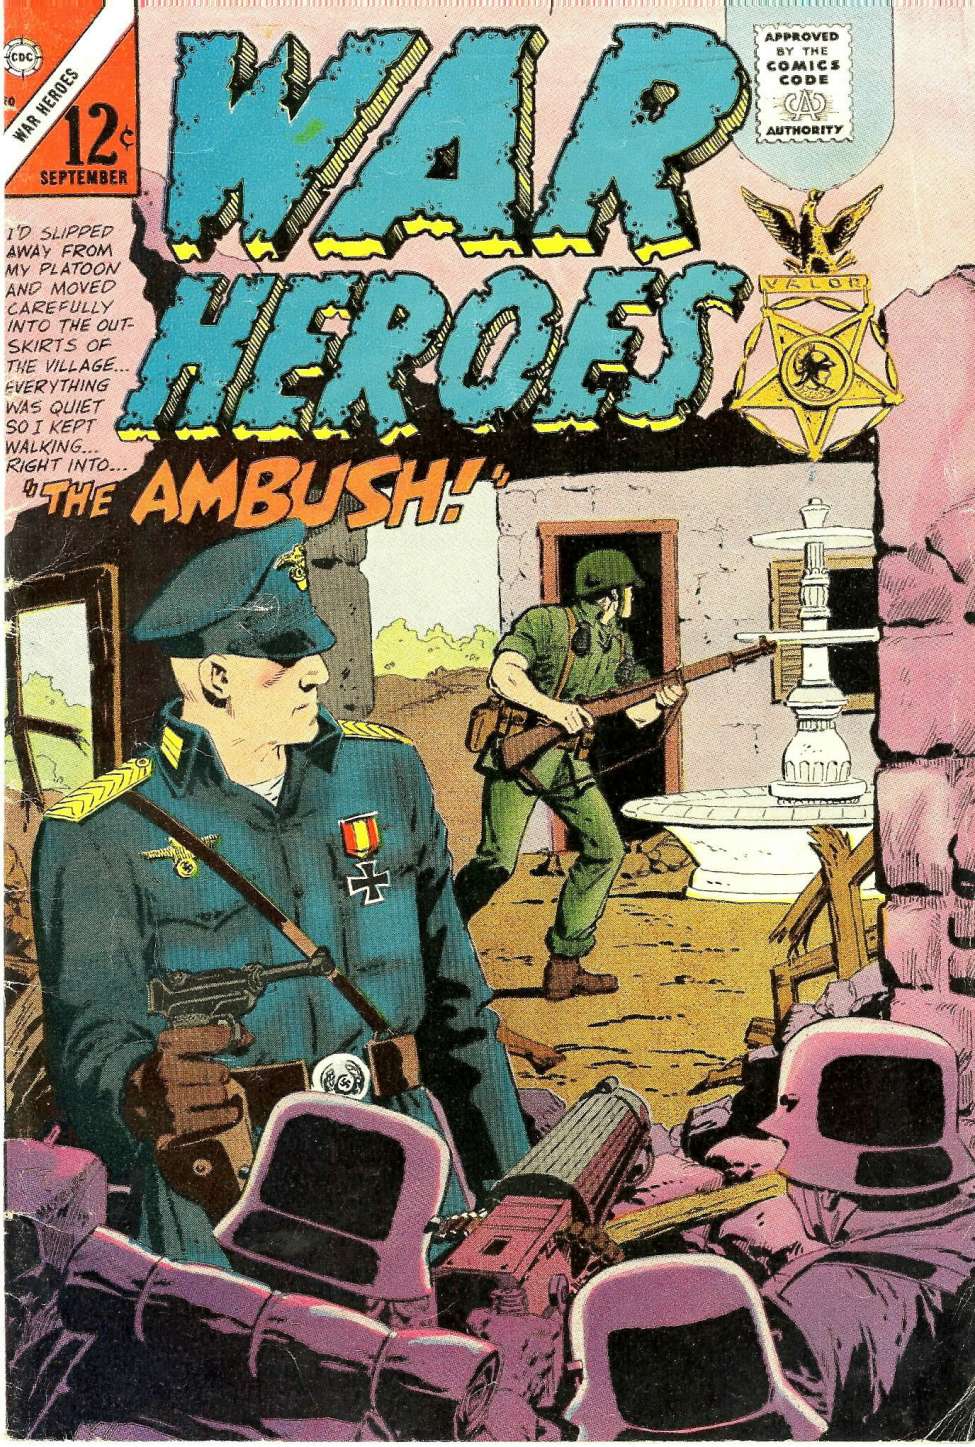 Comic Book Cover For War Heroes 20